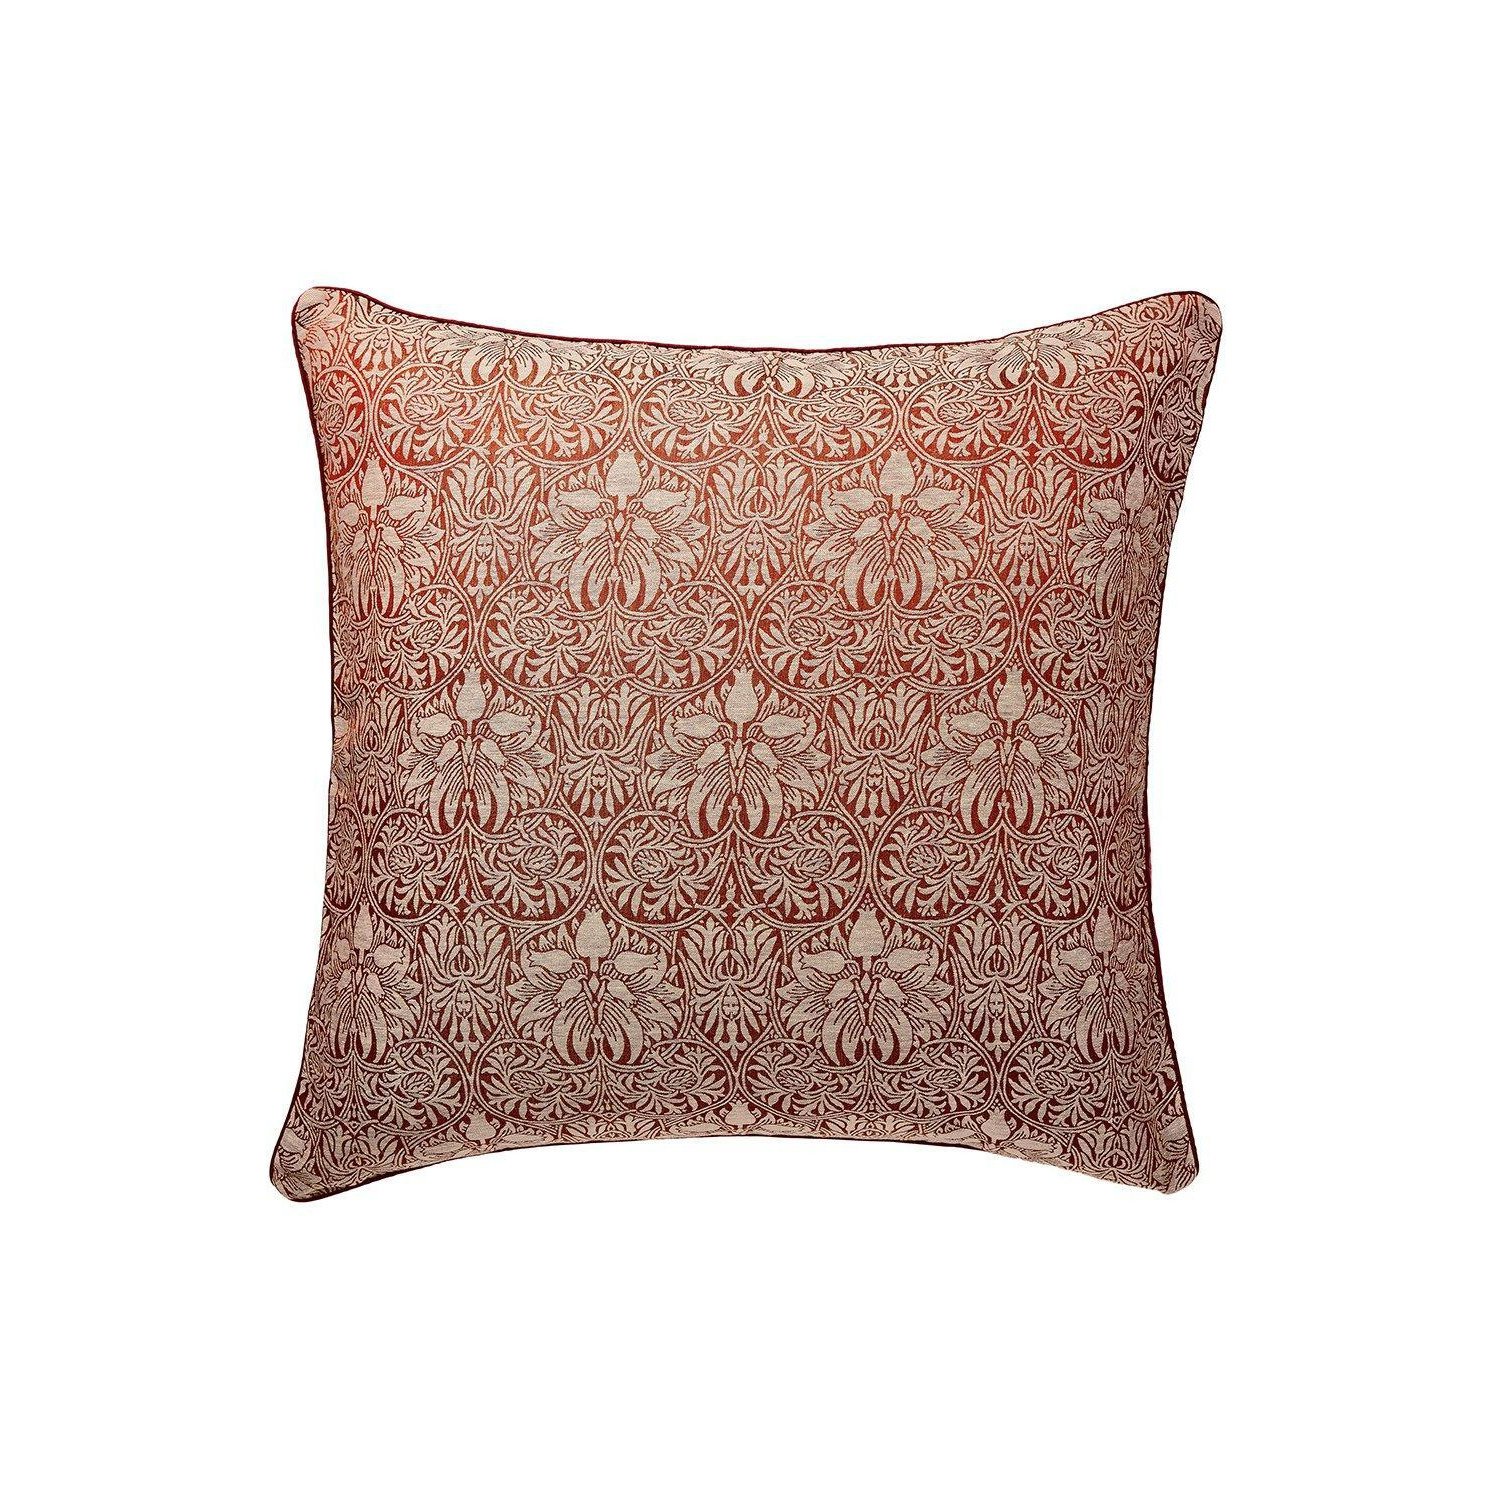 'Crown Imperial' Square Pillowcase - image 1